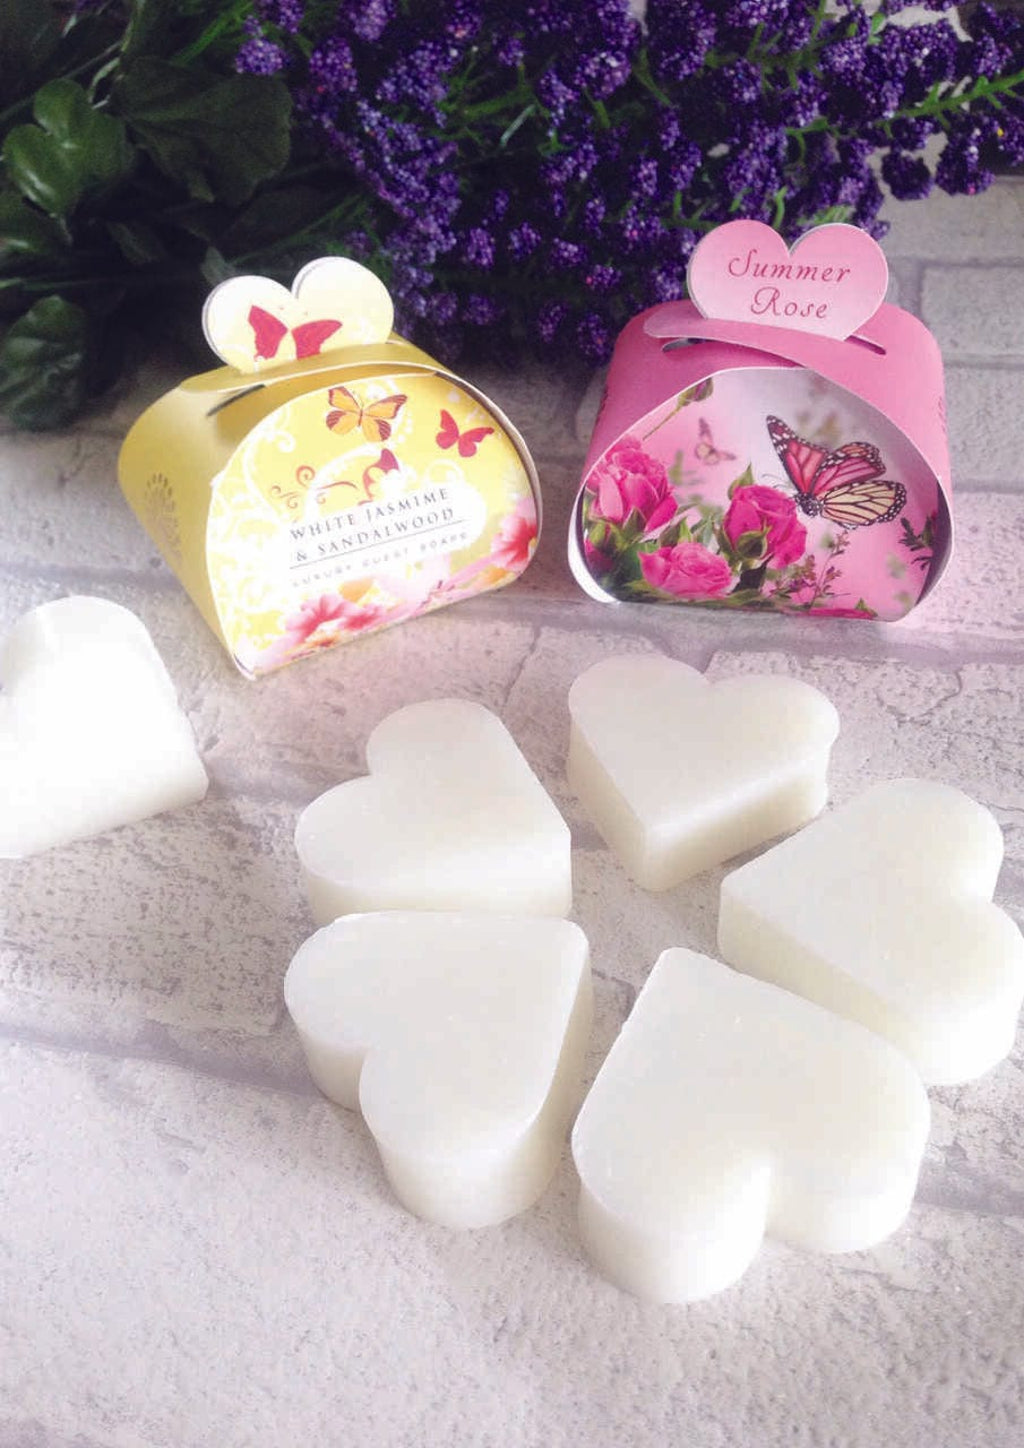 Clematis and Lime Blossom Guest Soaps (3 x 20g) from our Luxury Bar Soap collection by The English Soap Company